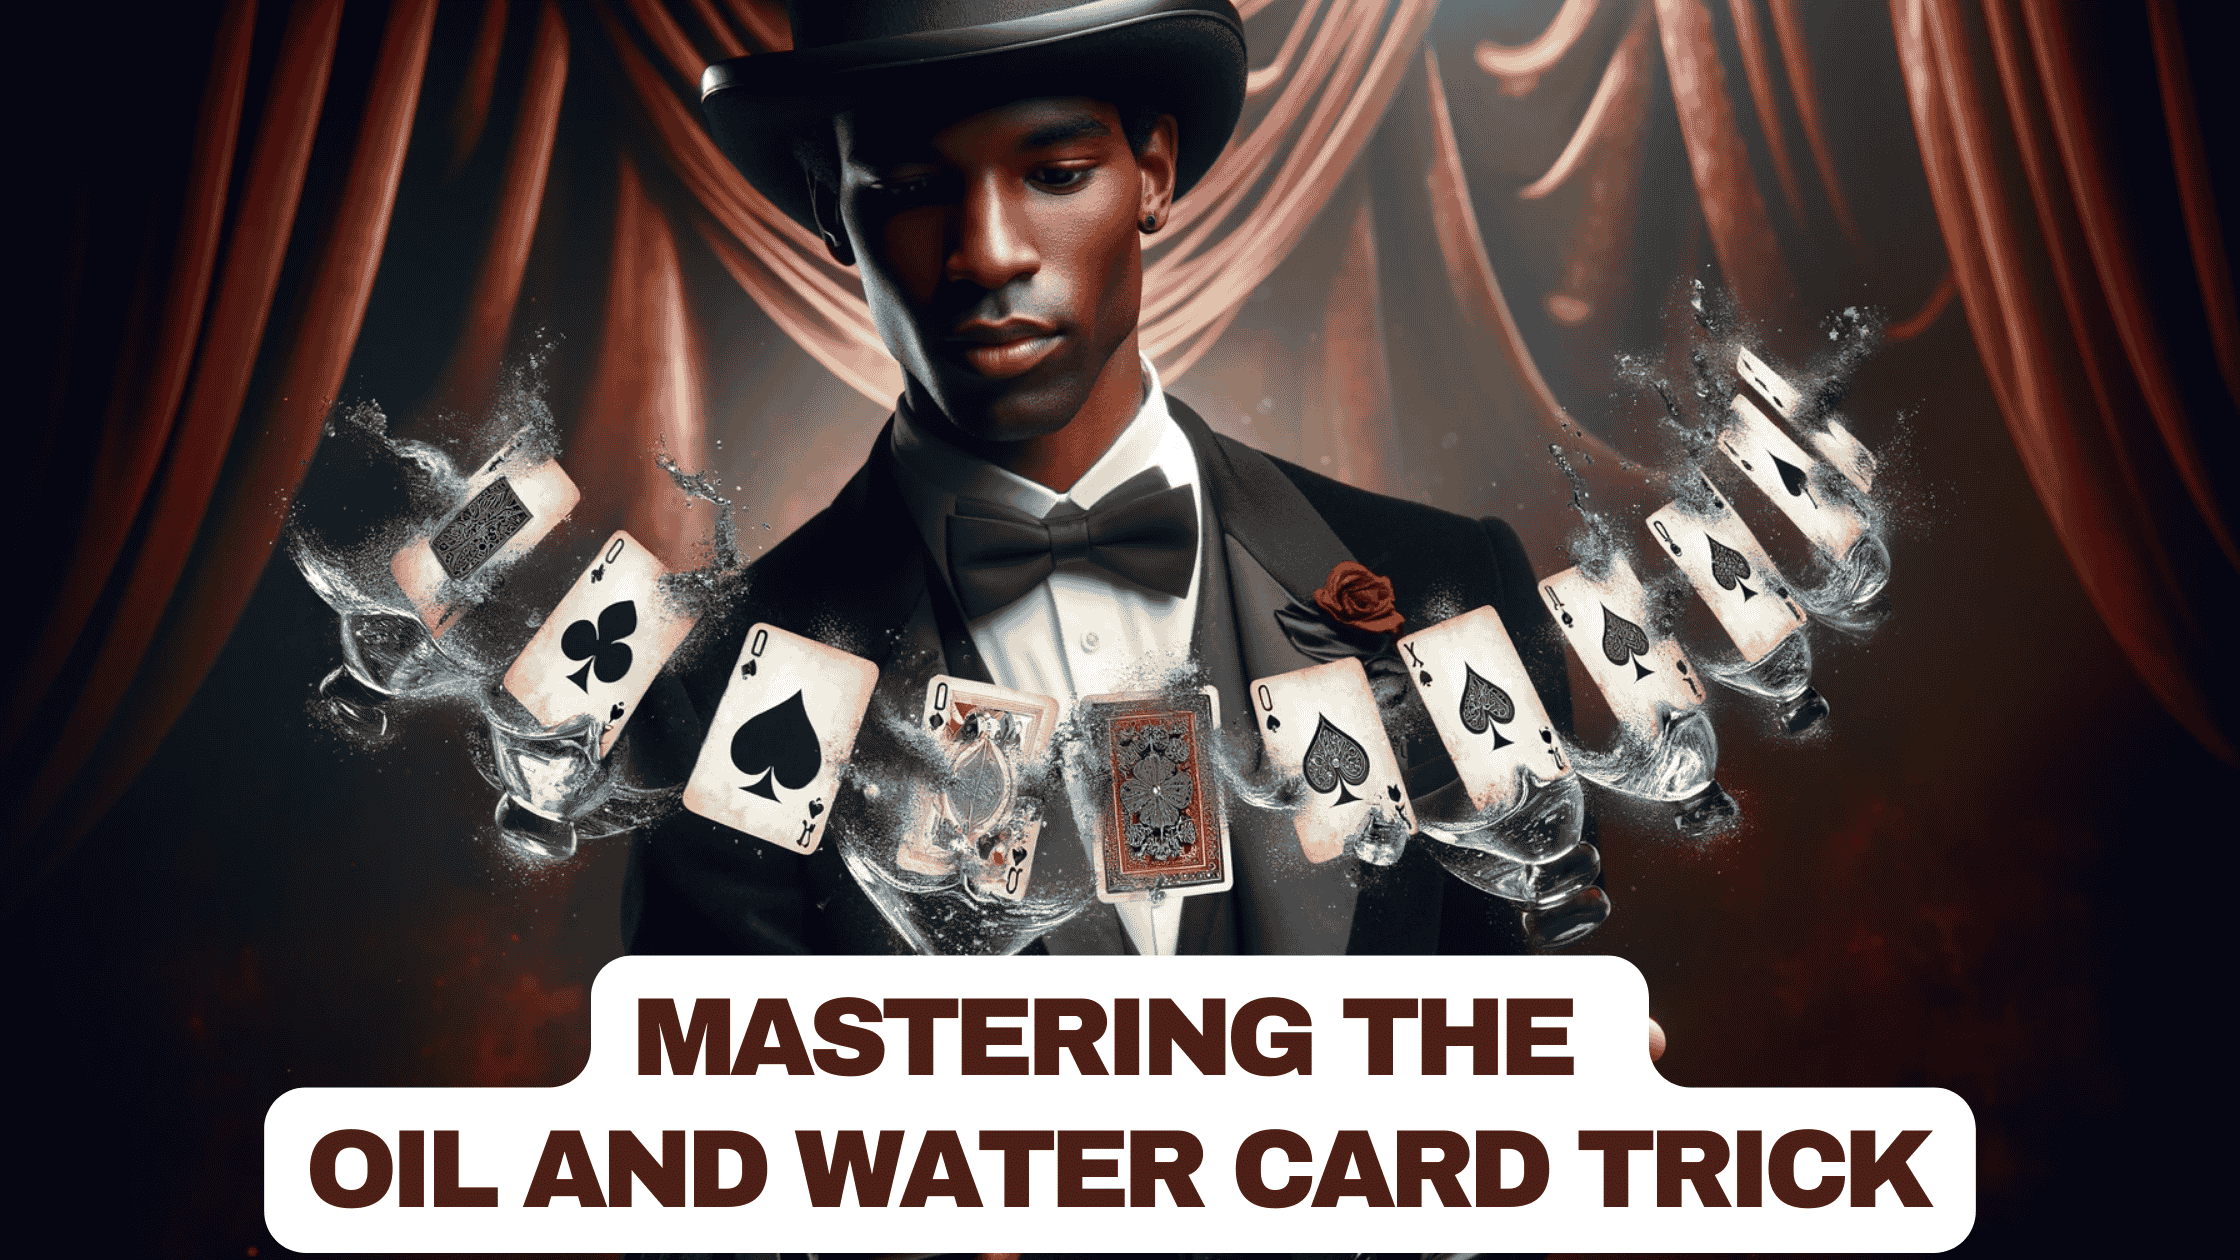 Mastering the Oil and Water Card Trick